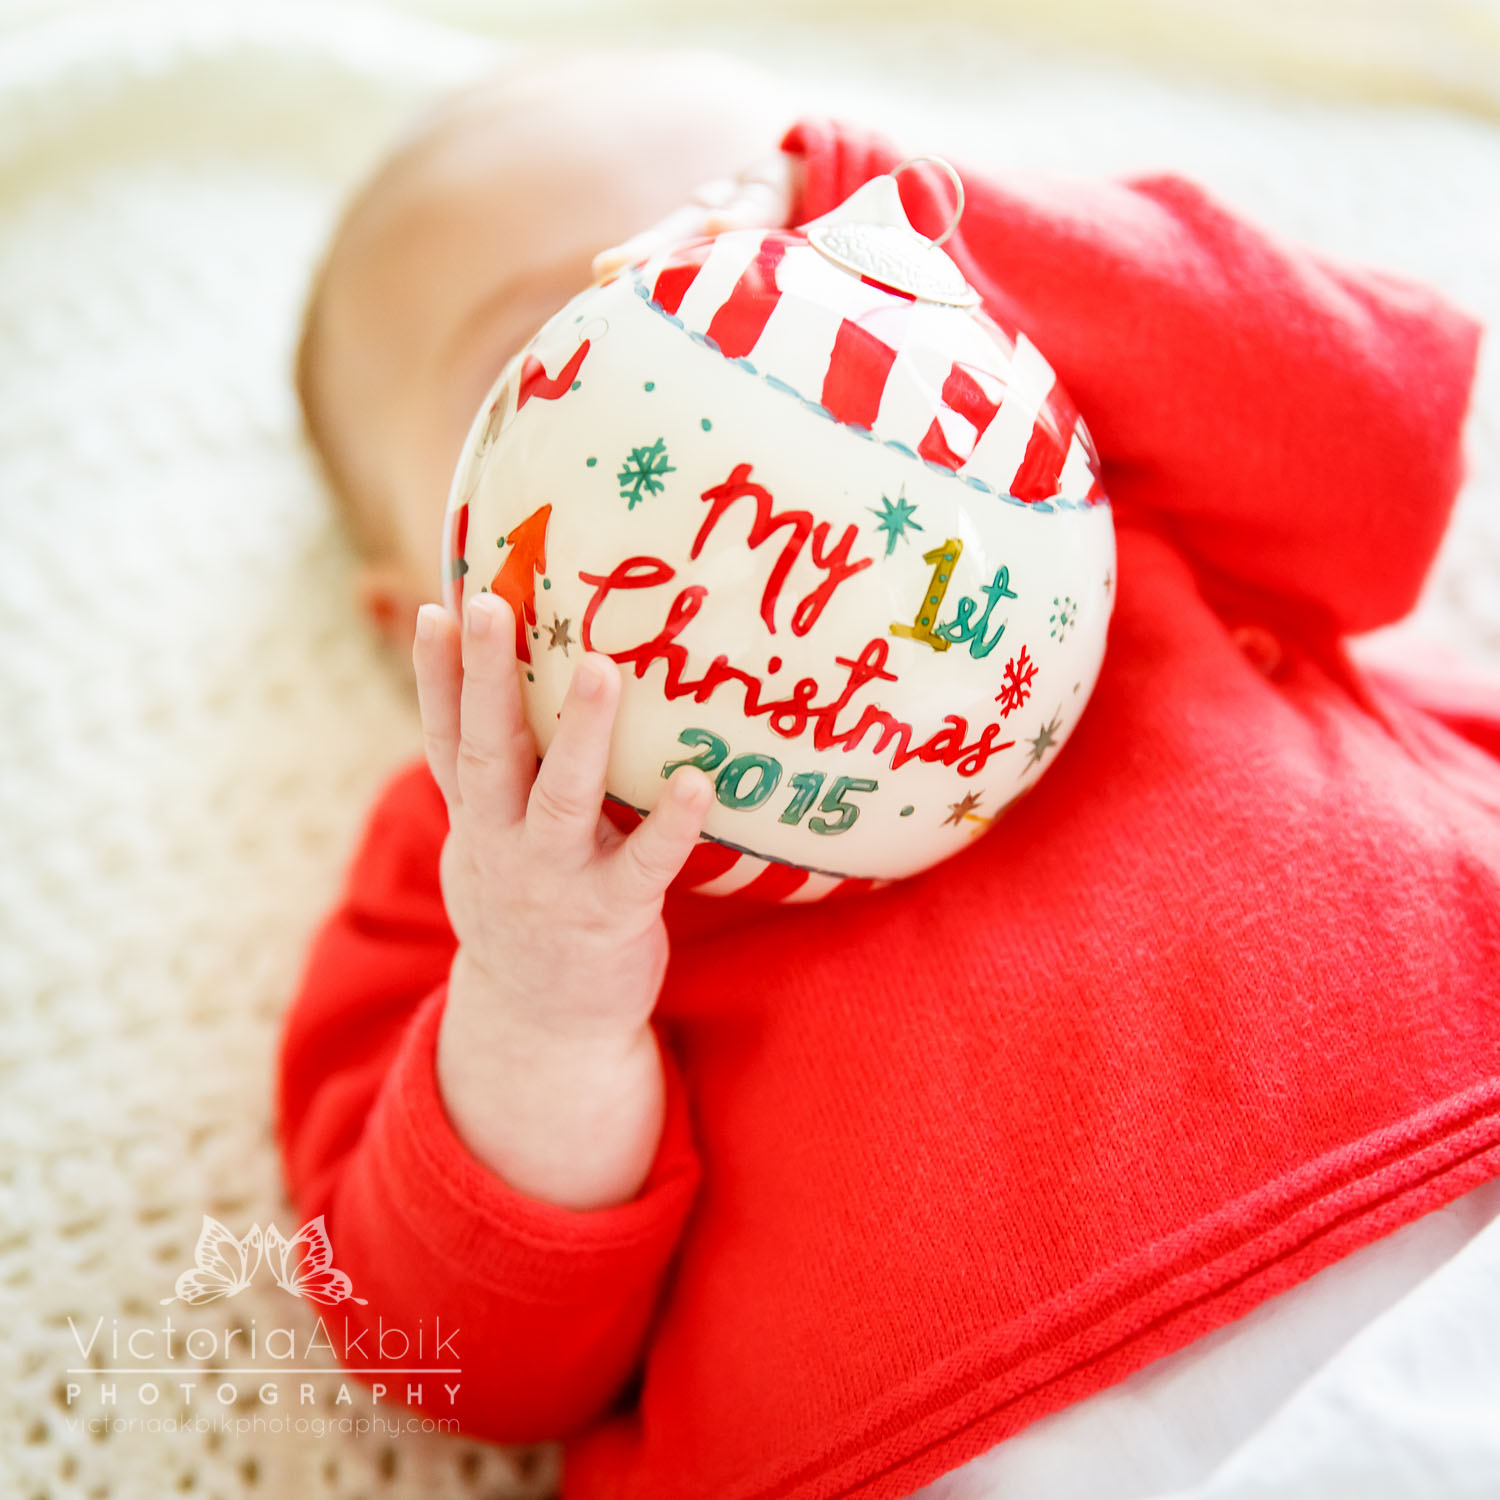 Baby's first Christmas At-Home Session | Abu Dhabi Lifestyle Family Photography » Victoria Akbik Photography